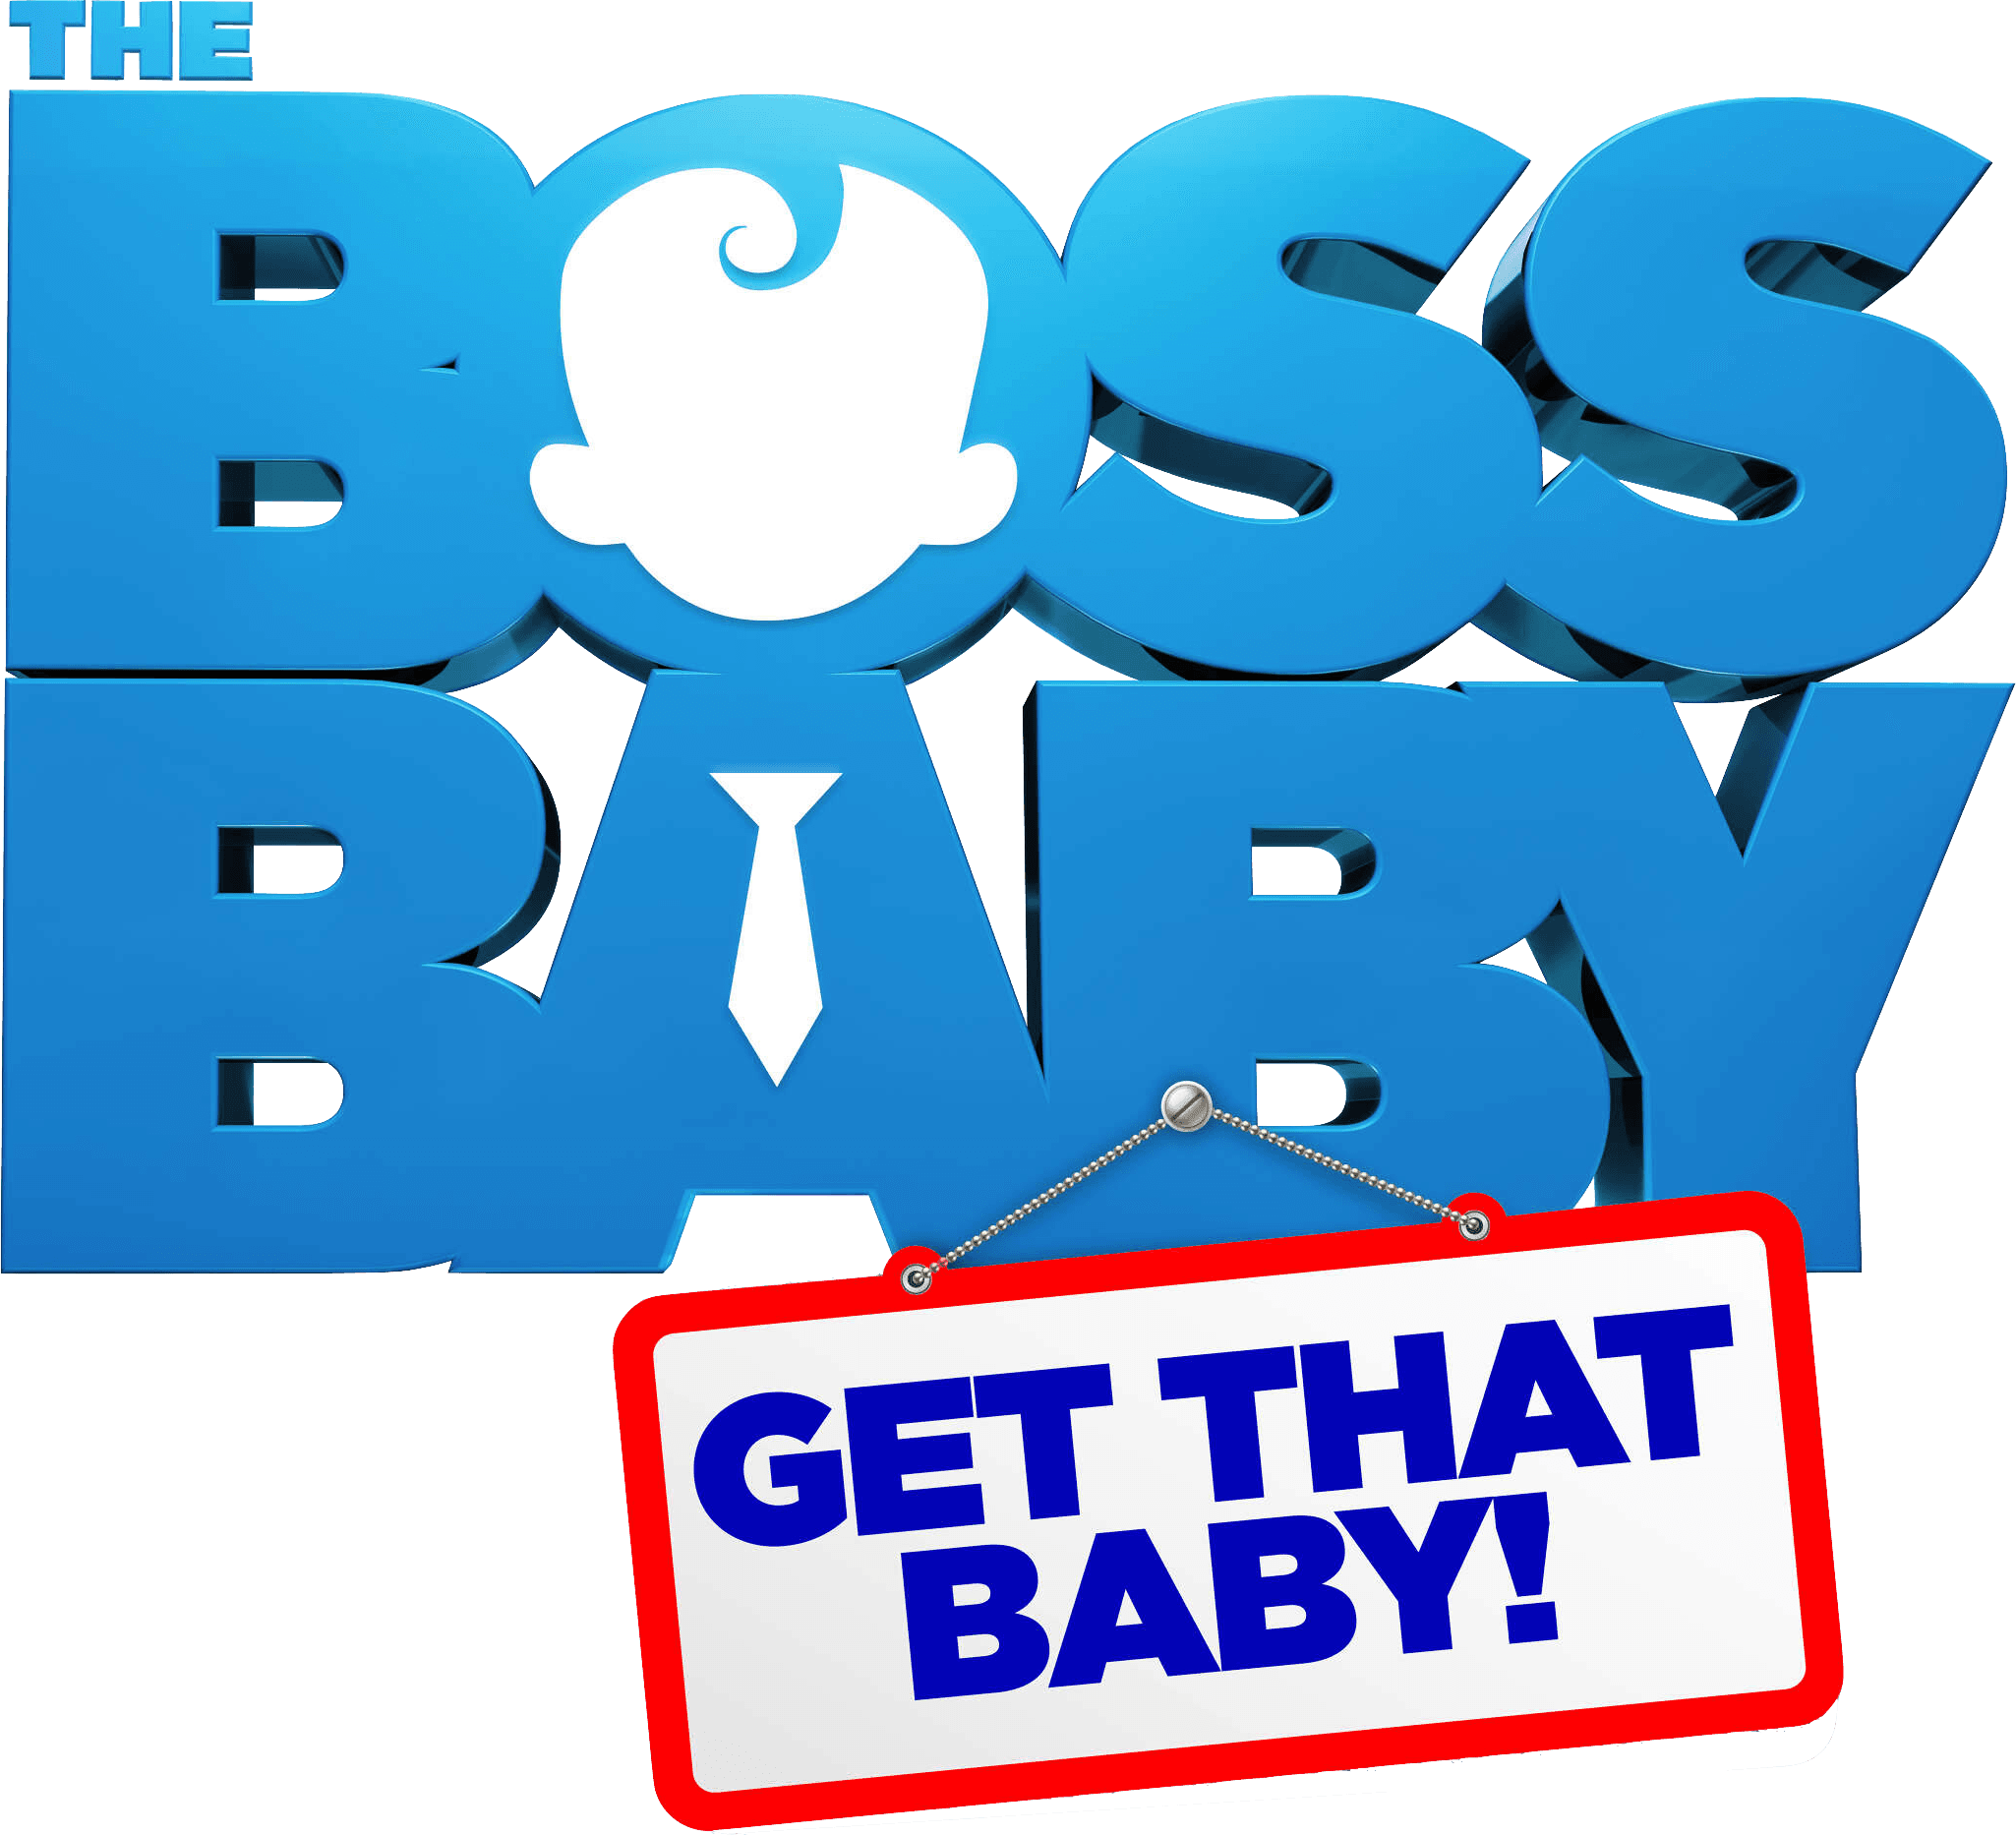 The Boss Baby: Get That Baby! logo